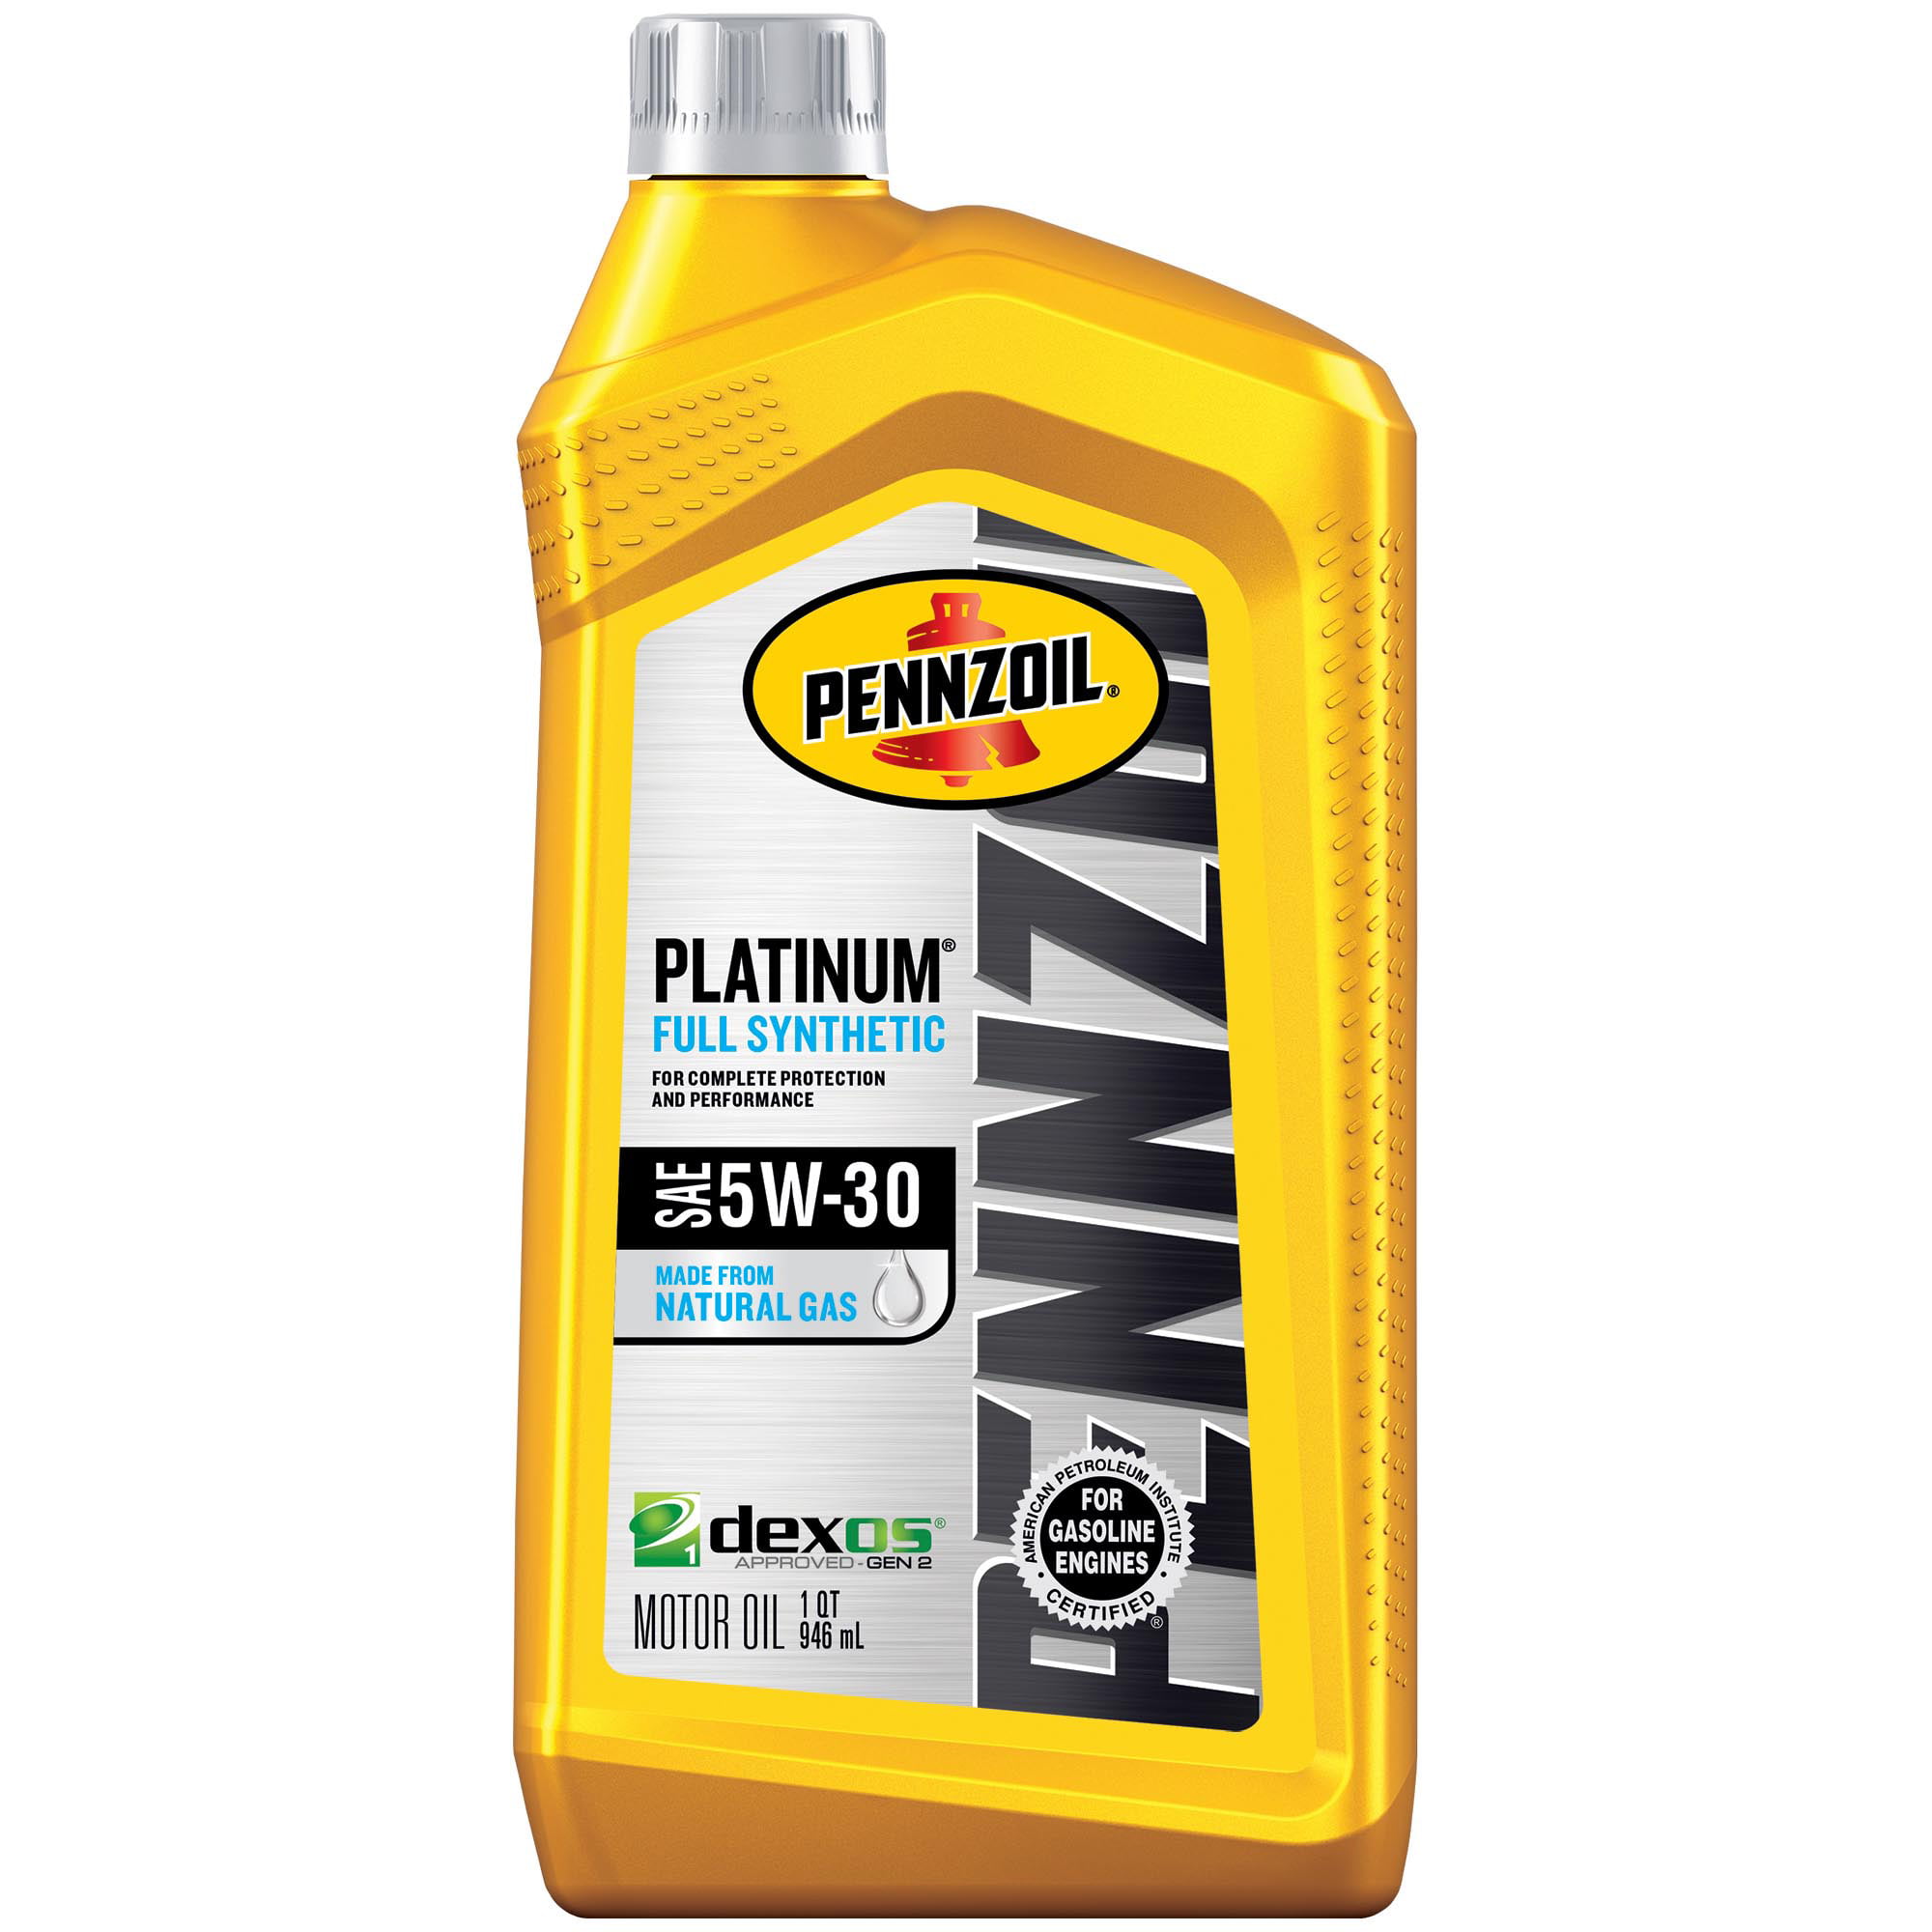 pennzoil-platinum-high-mileage-5w-30-full-synthetic-motor-oil-5-qt